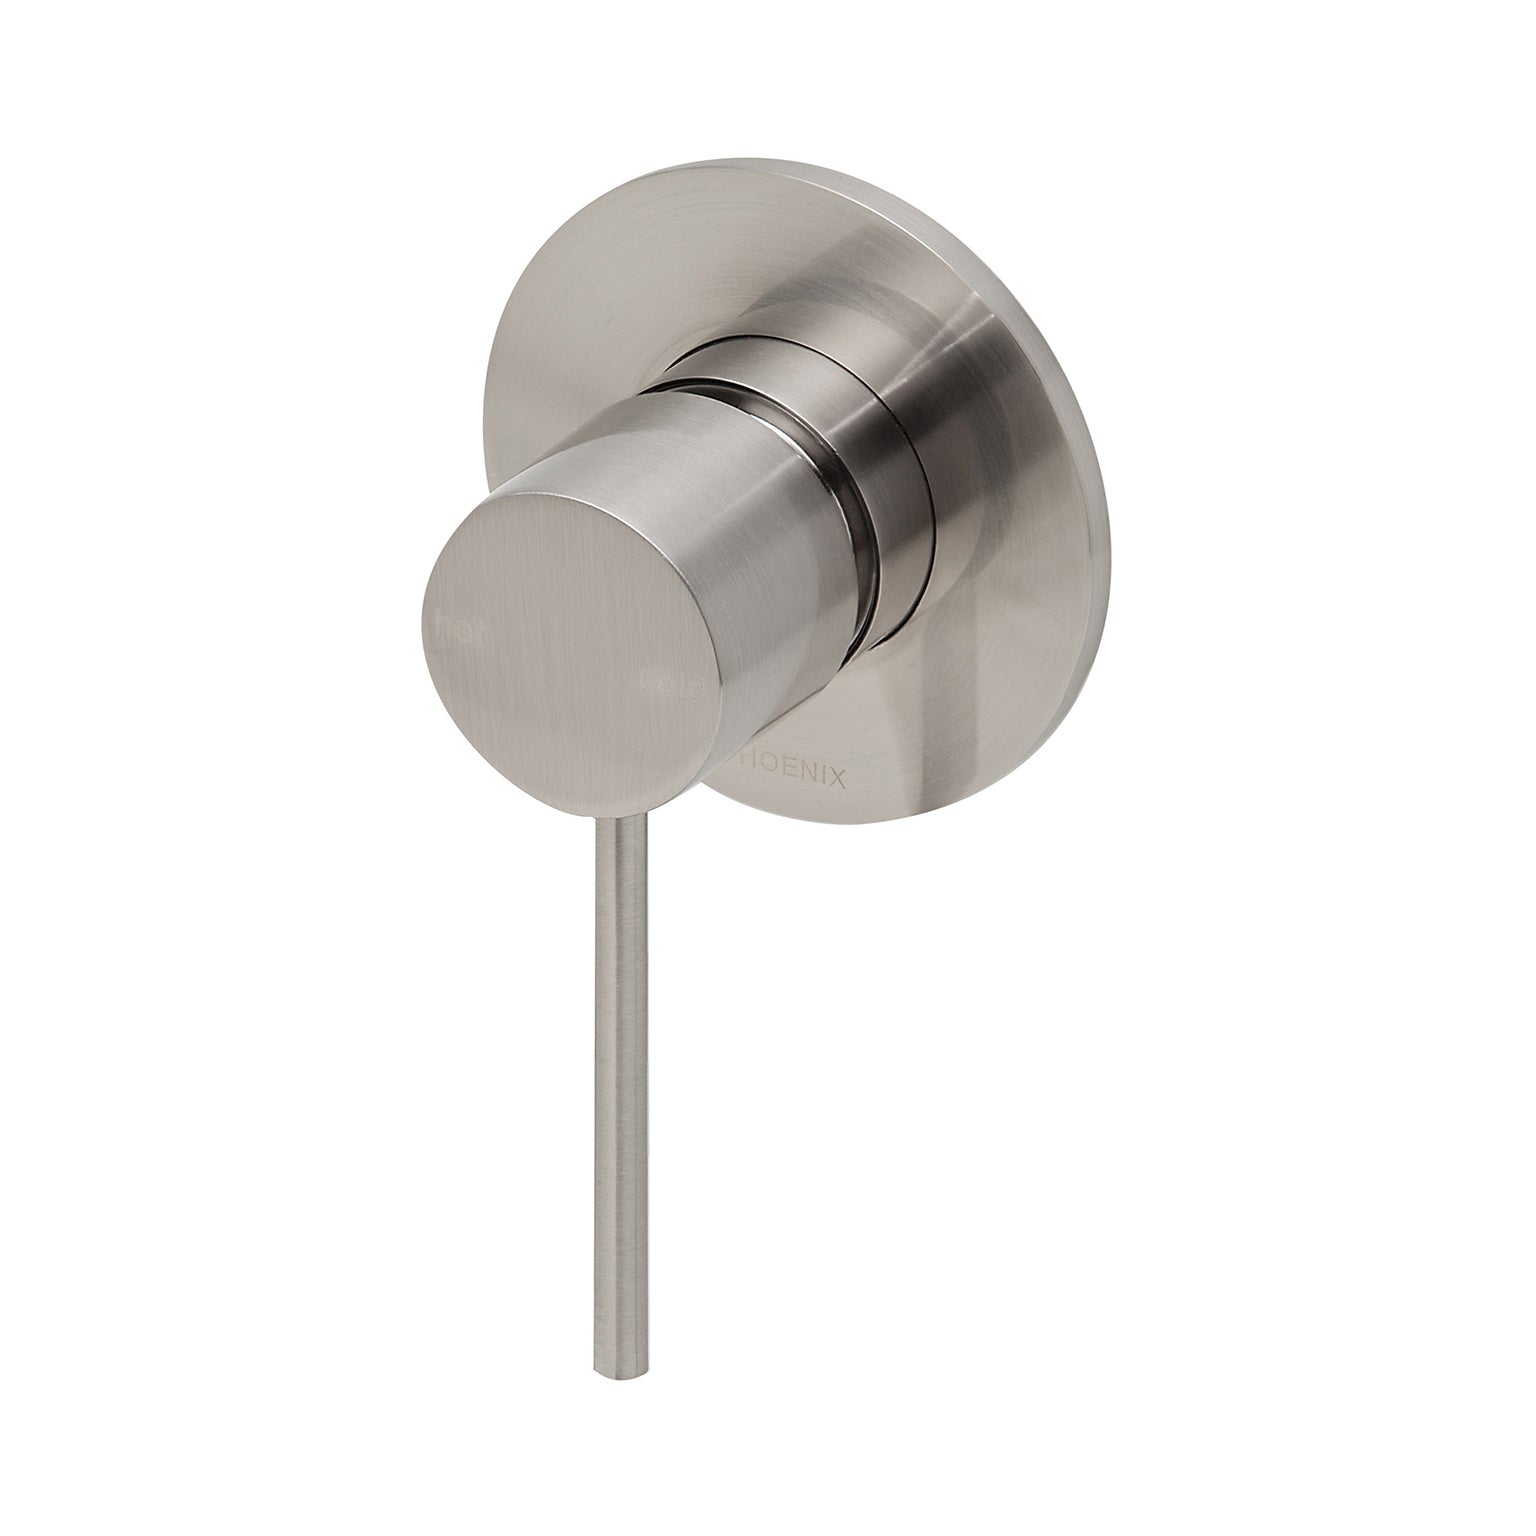 PHOENIX VIVID SLIMLINE SWITCHMIX SHOWER / WALL MIXER FIT-OFF AND ROUGH-IN KIT BRUSHED NICKEL